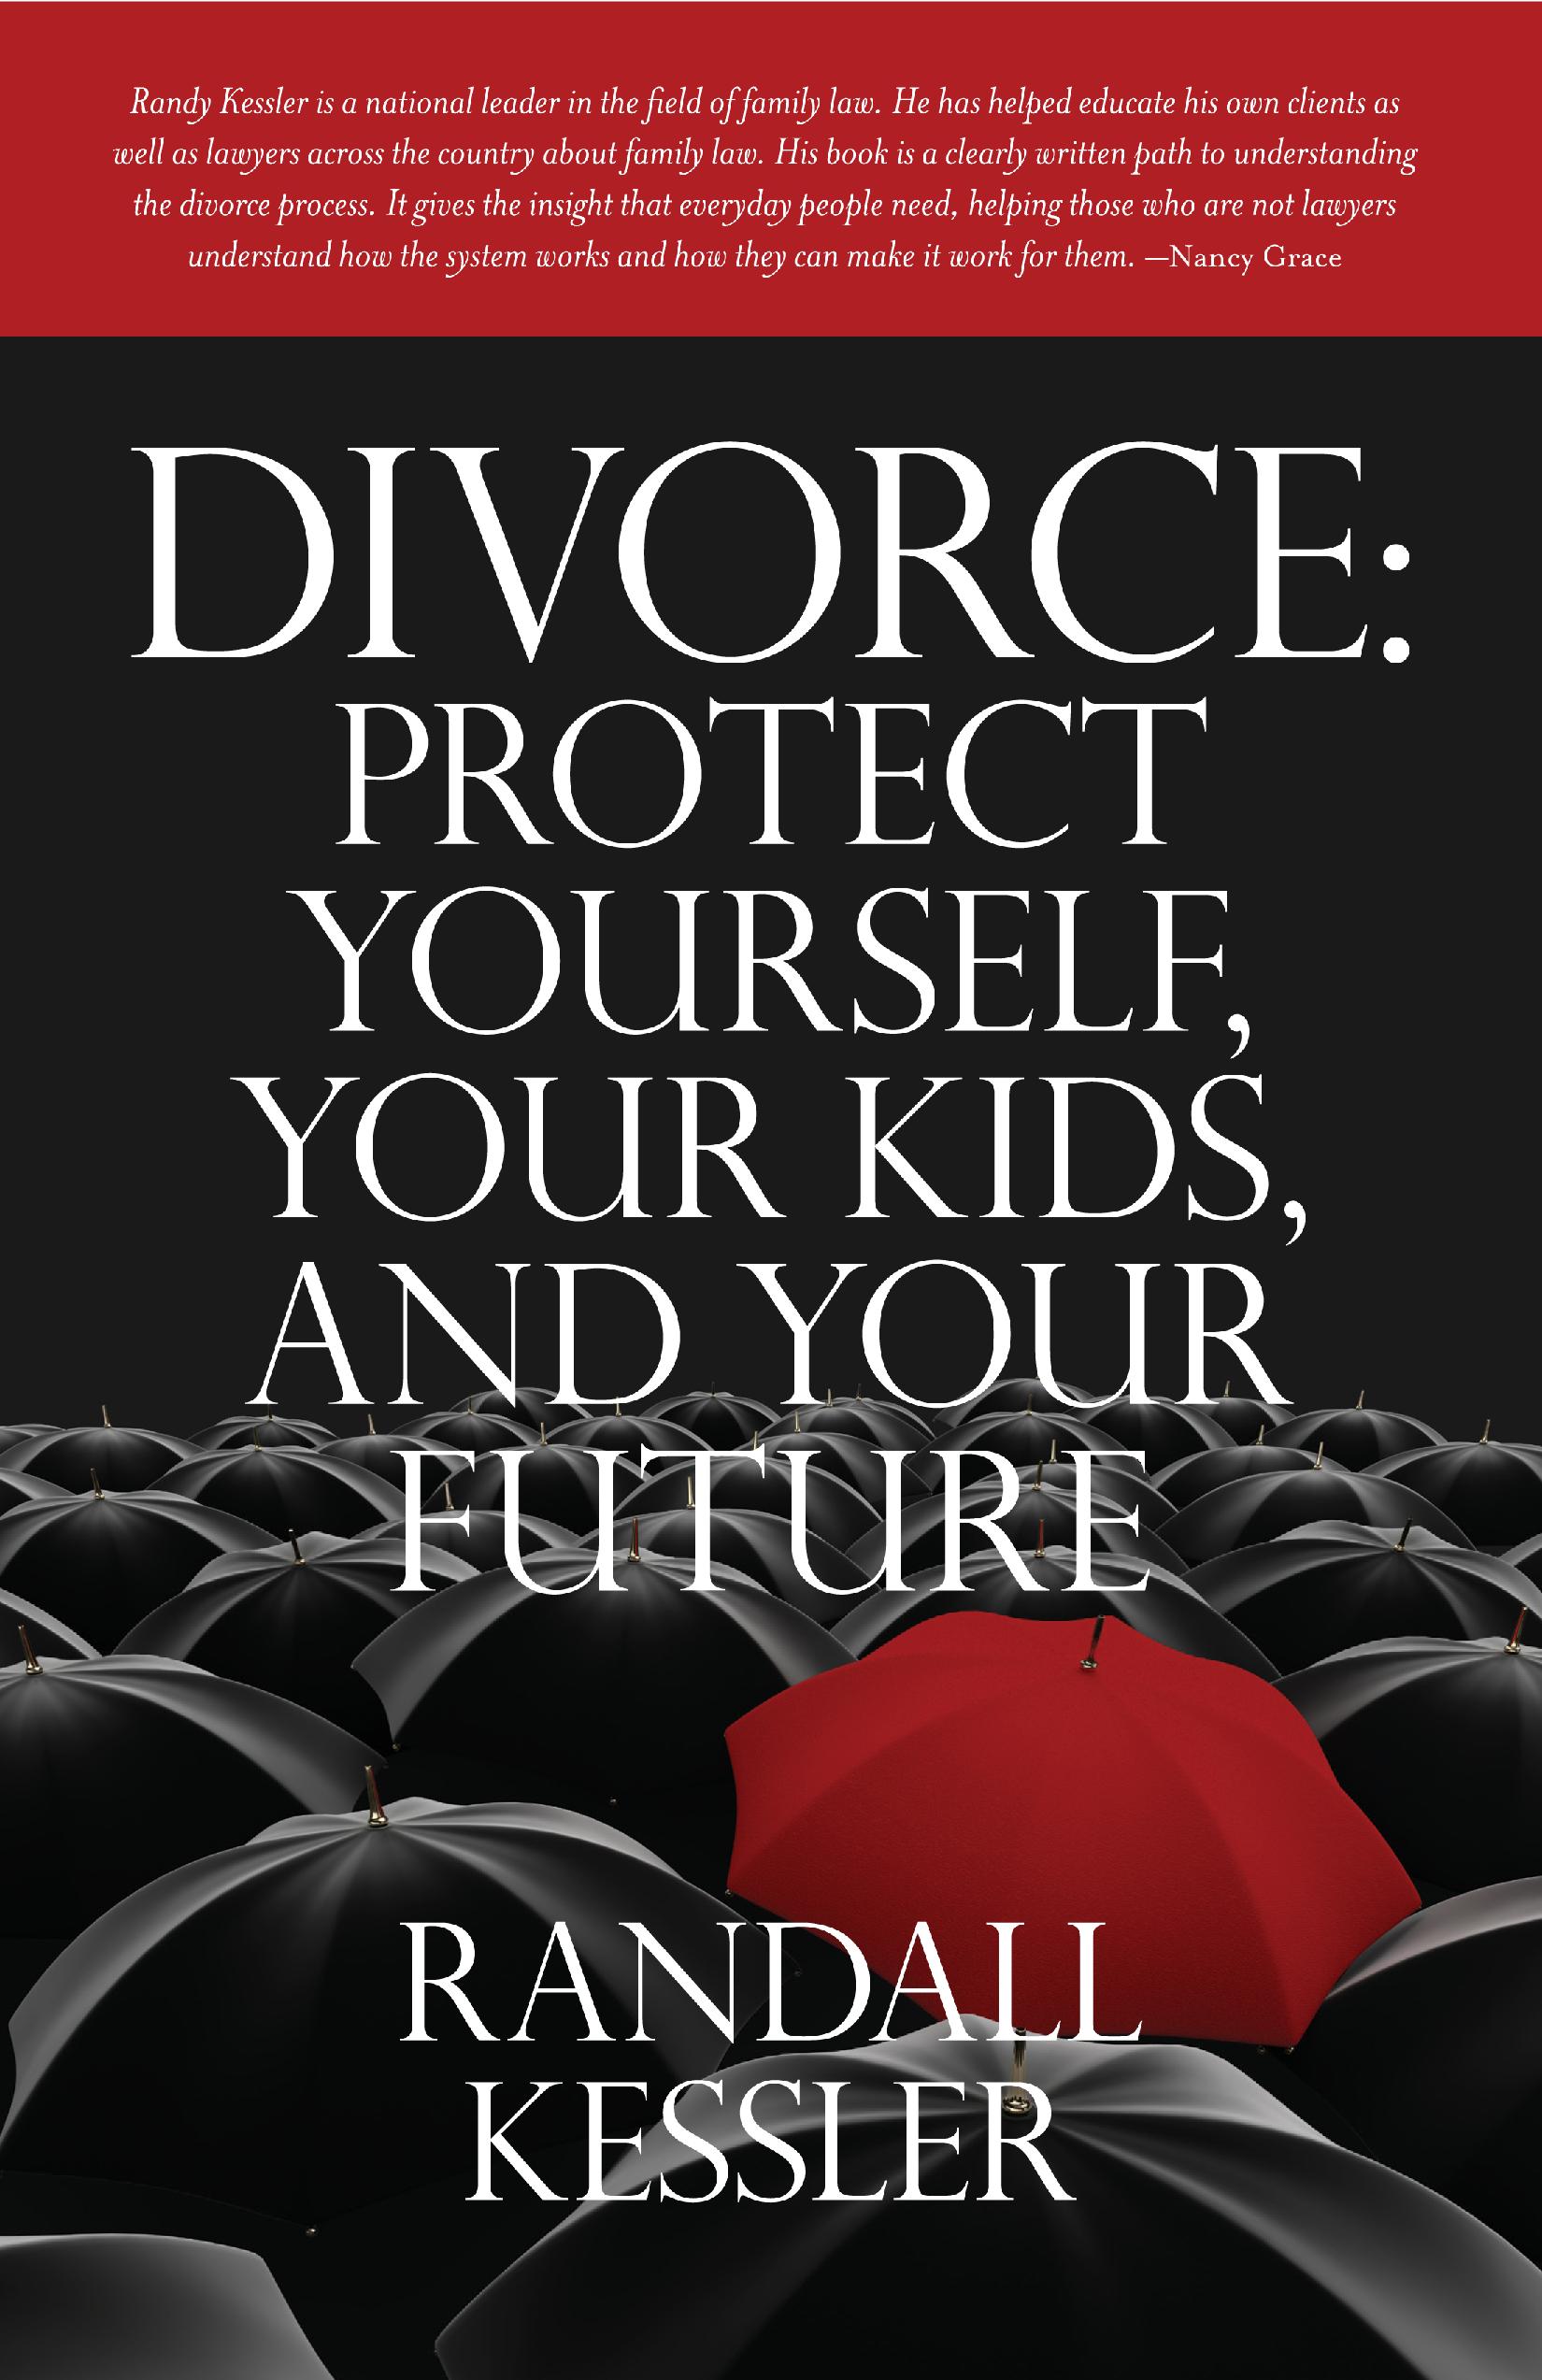 Divorce:Protect Yourself Book Cover